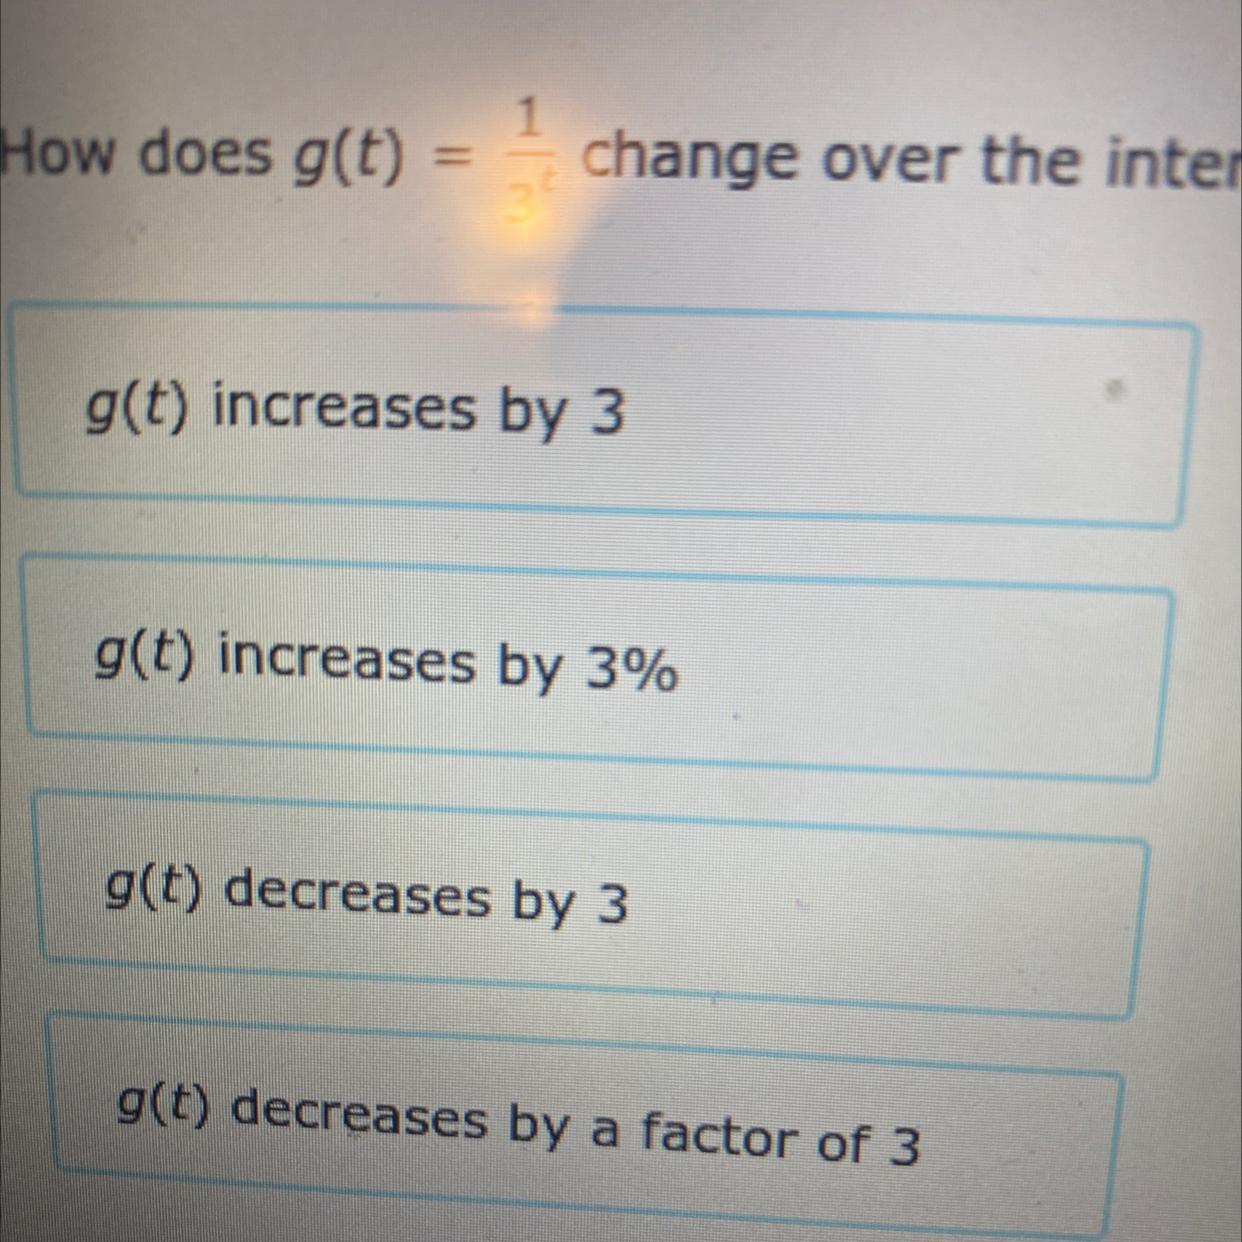 How Does G(t) = 1/2t Change Over The Interval T = 0 To T = 1? 